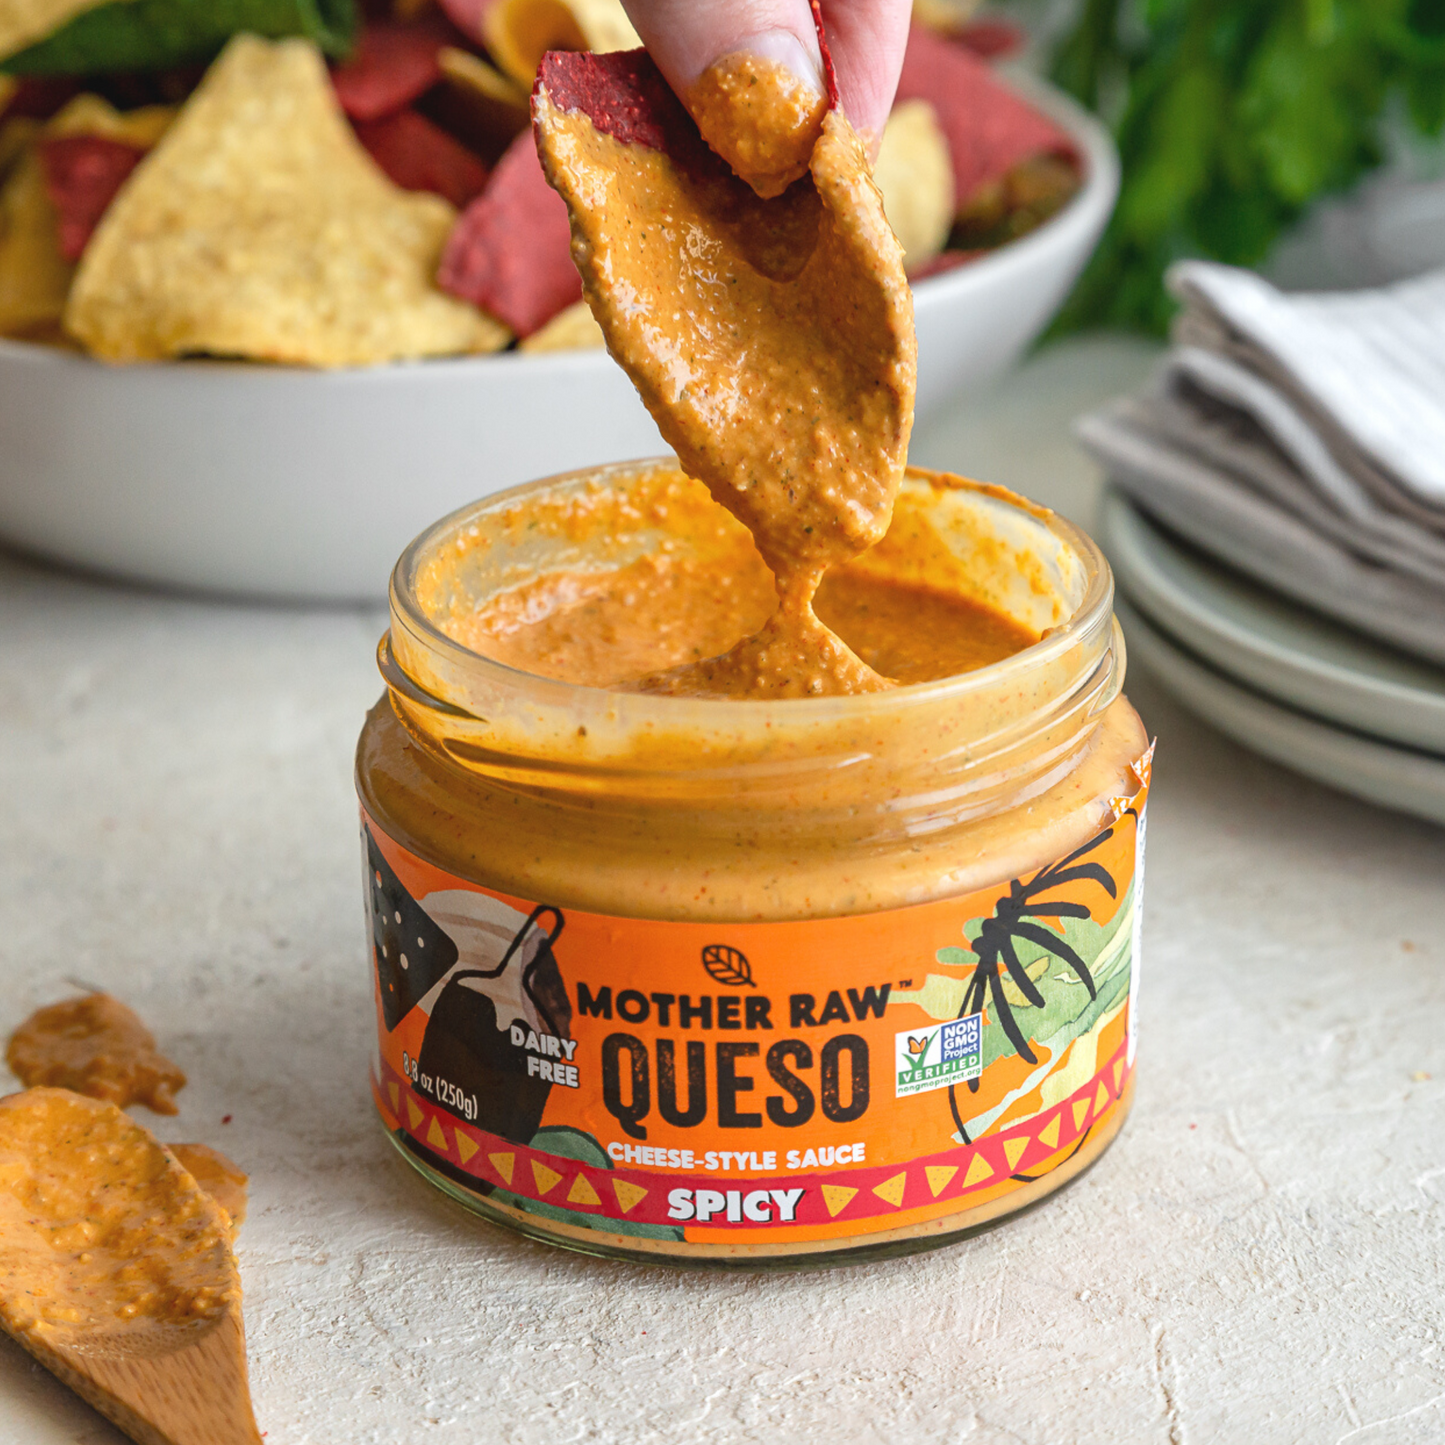 Mother Raw Dairy Free Spicy Vegan Queso Dip , Product Image dipping in cheese